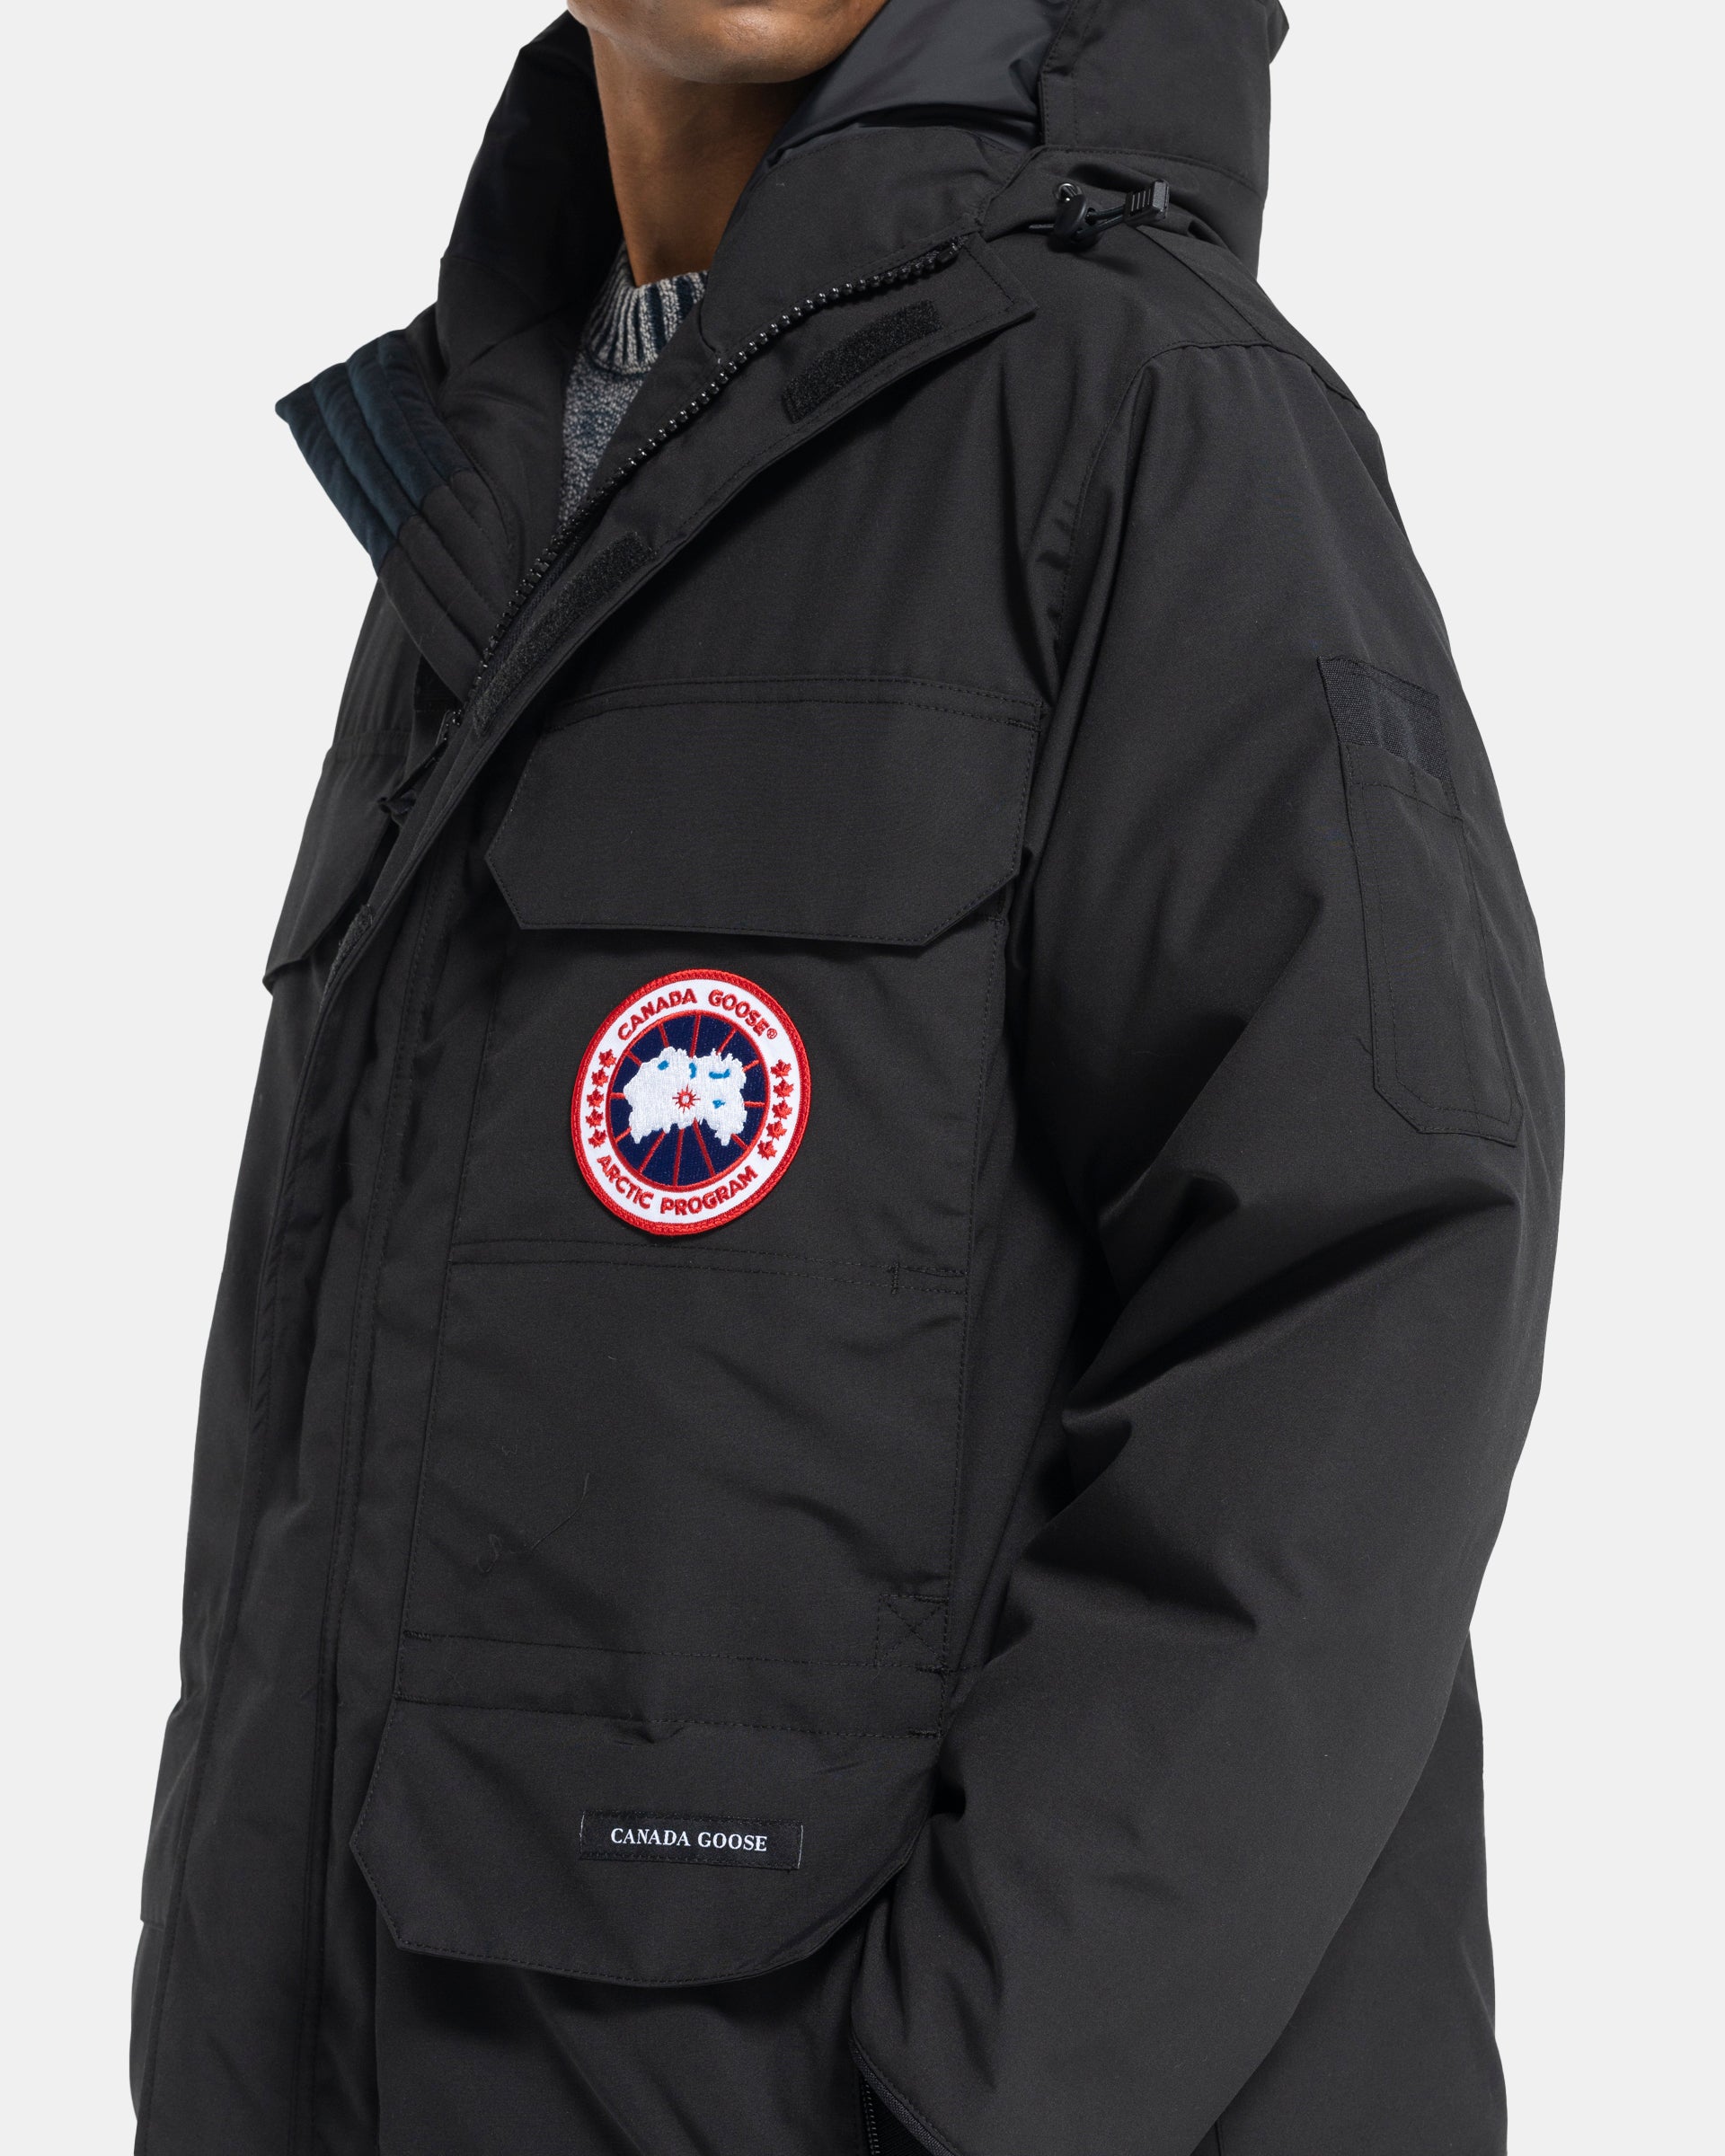 Expedition Parka in Black